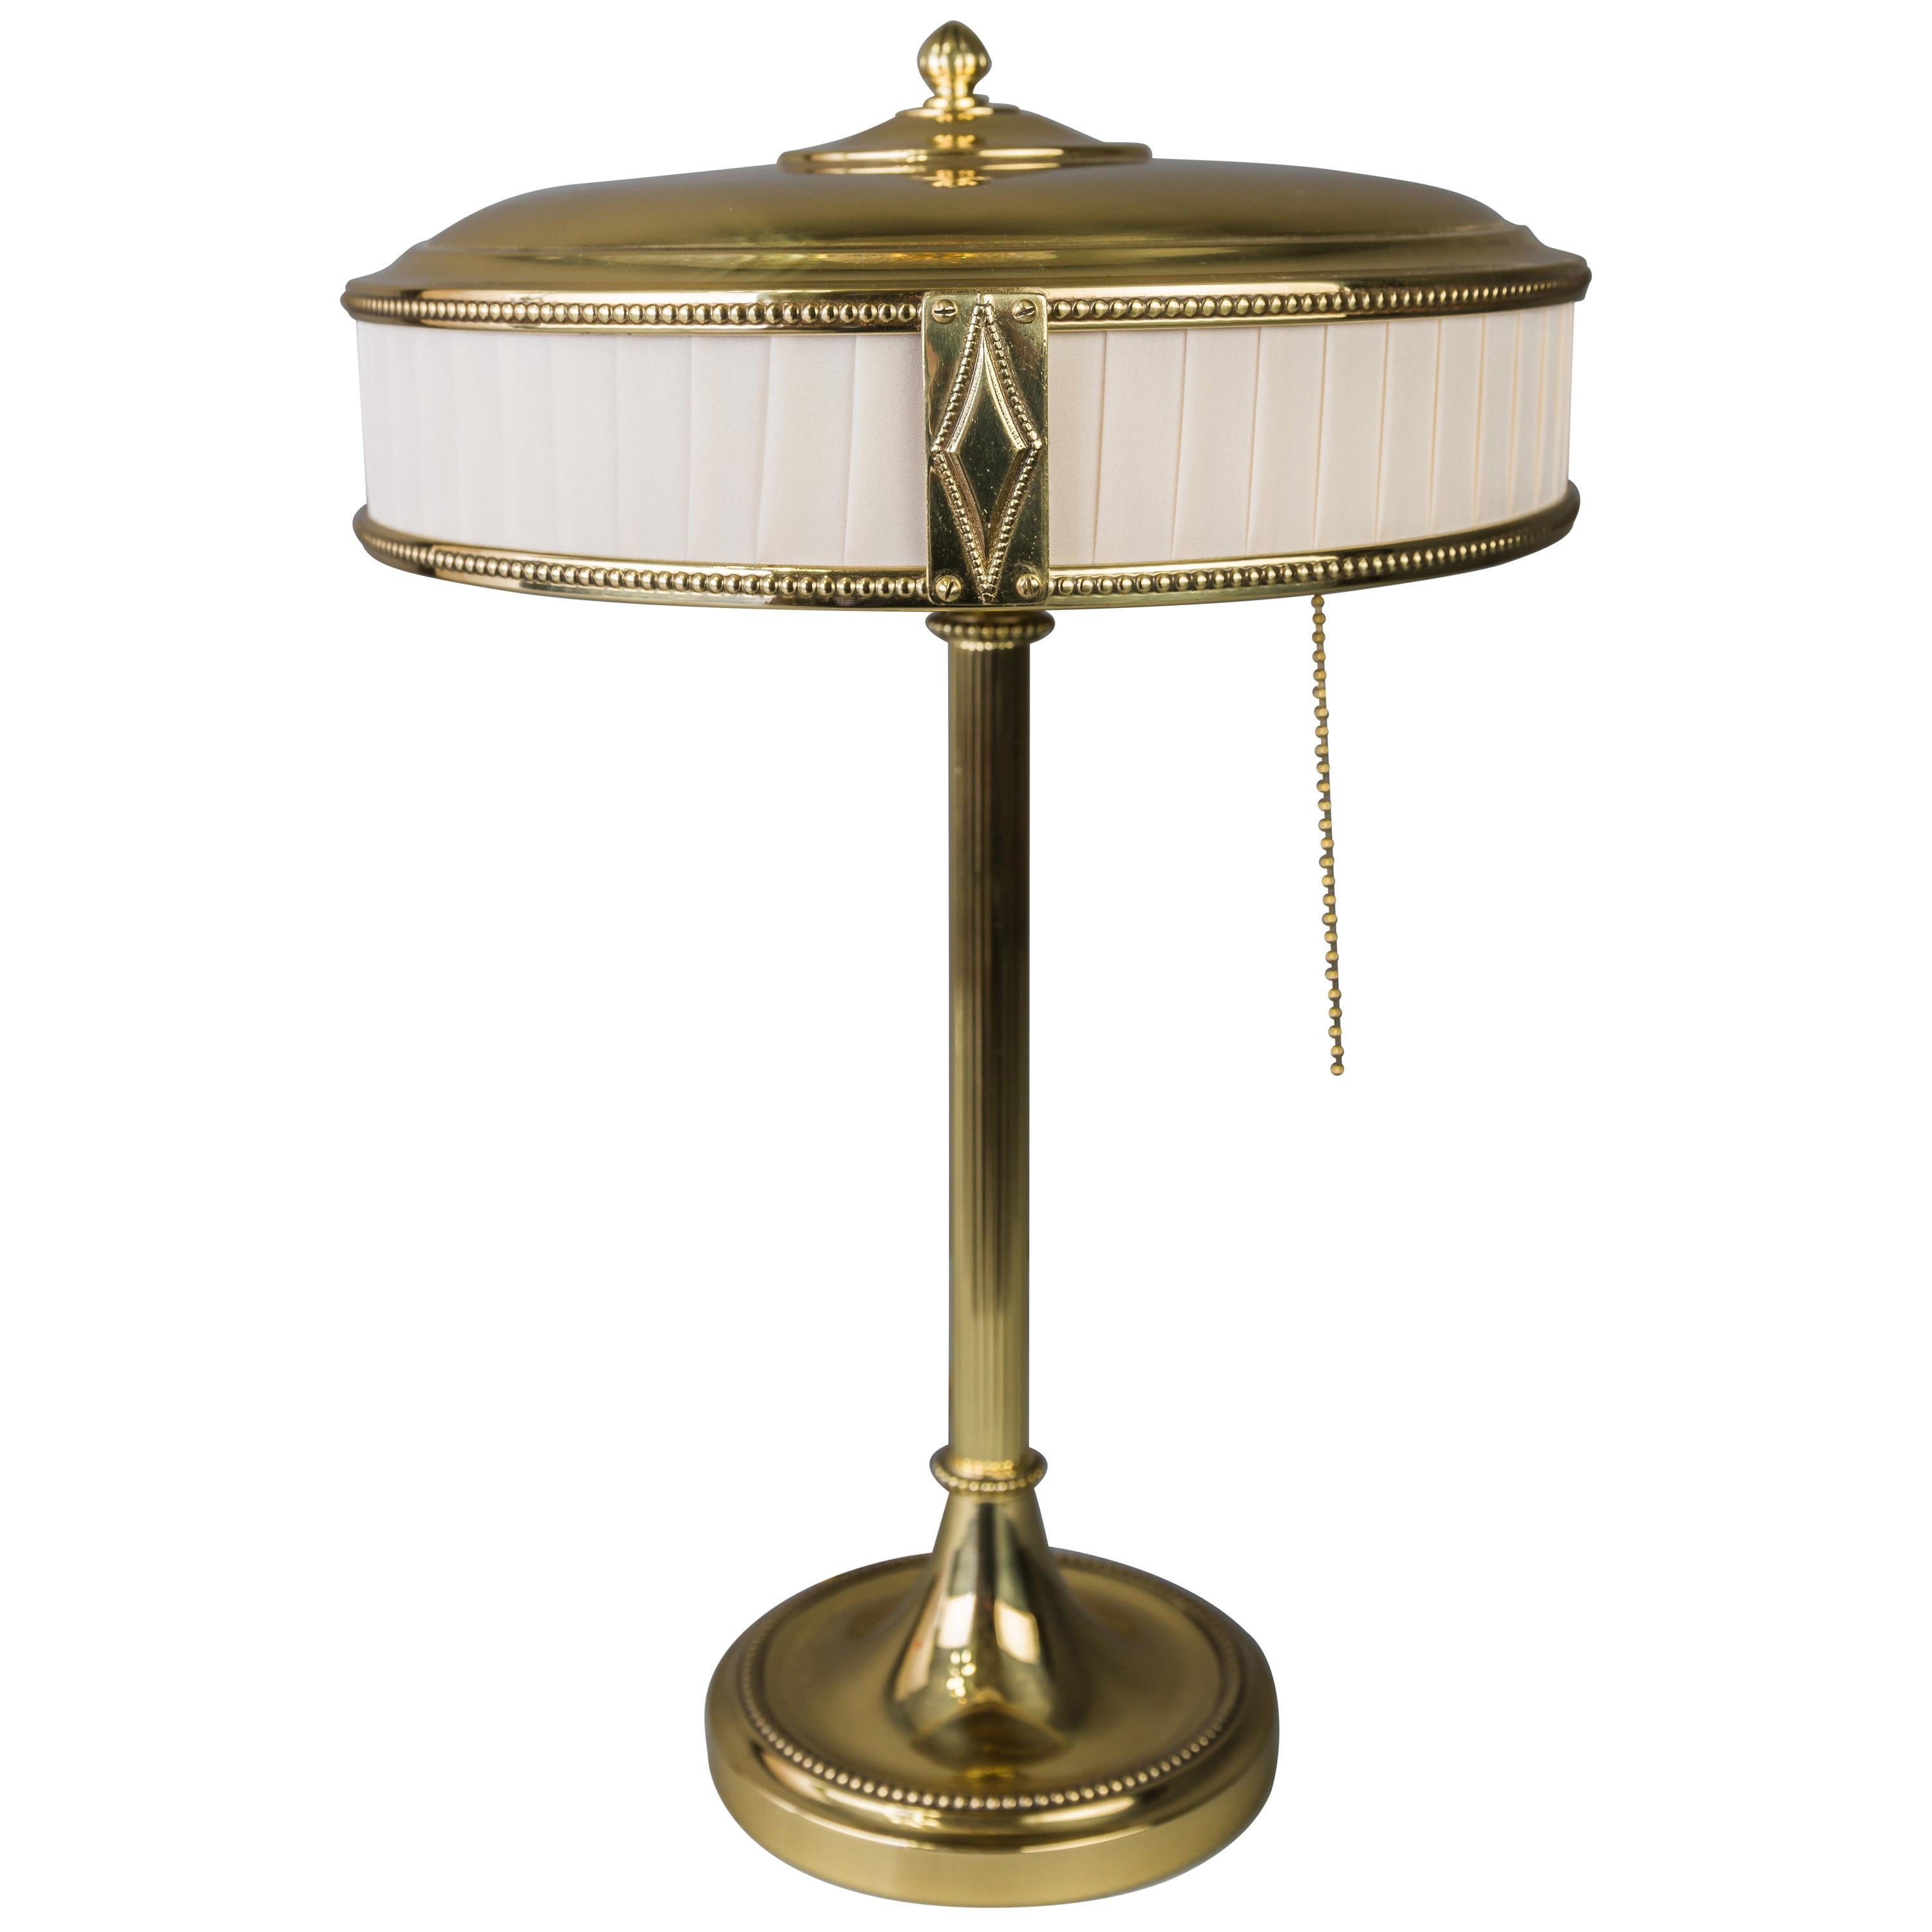 Art Deco Table Lamp Circa 1920s At 1stdibs, 1930 8217 S Art Deco Table Lamps